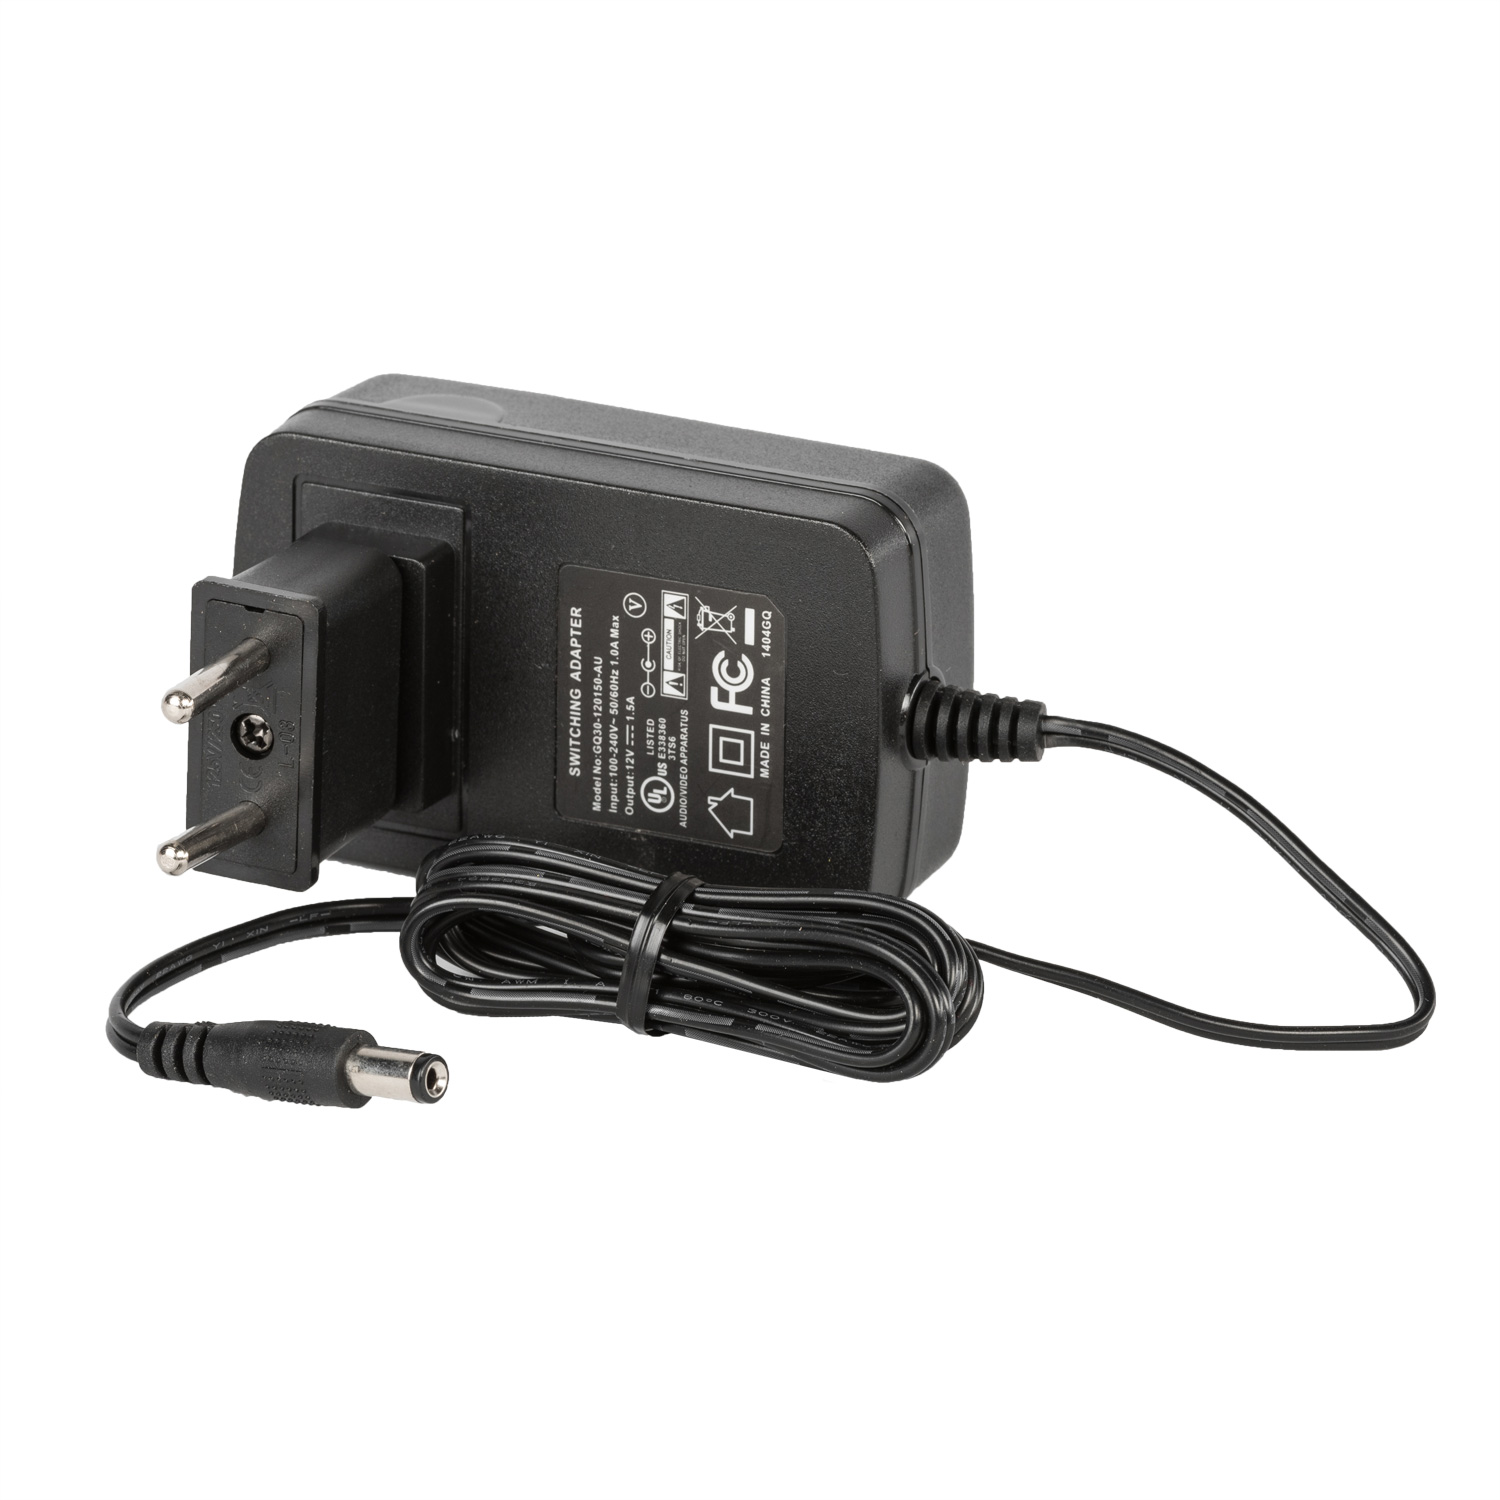 12 volt 1.5 amp AC/DC Adapter for Europe